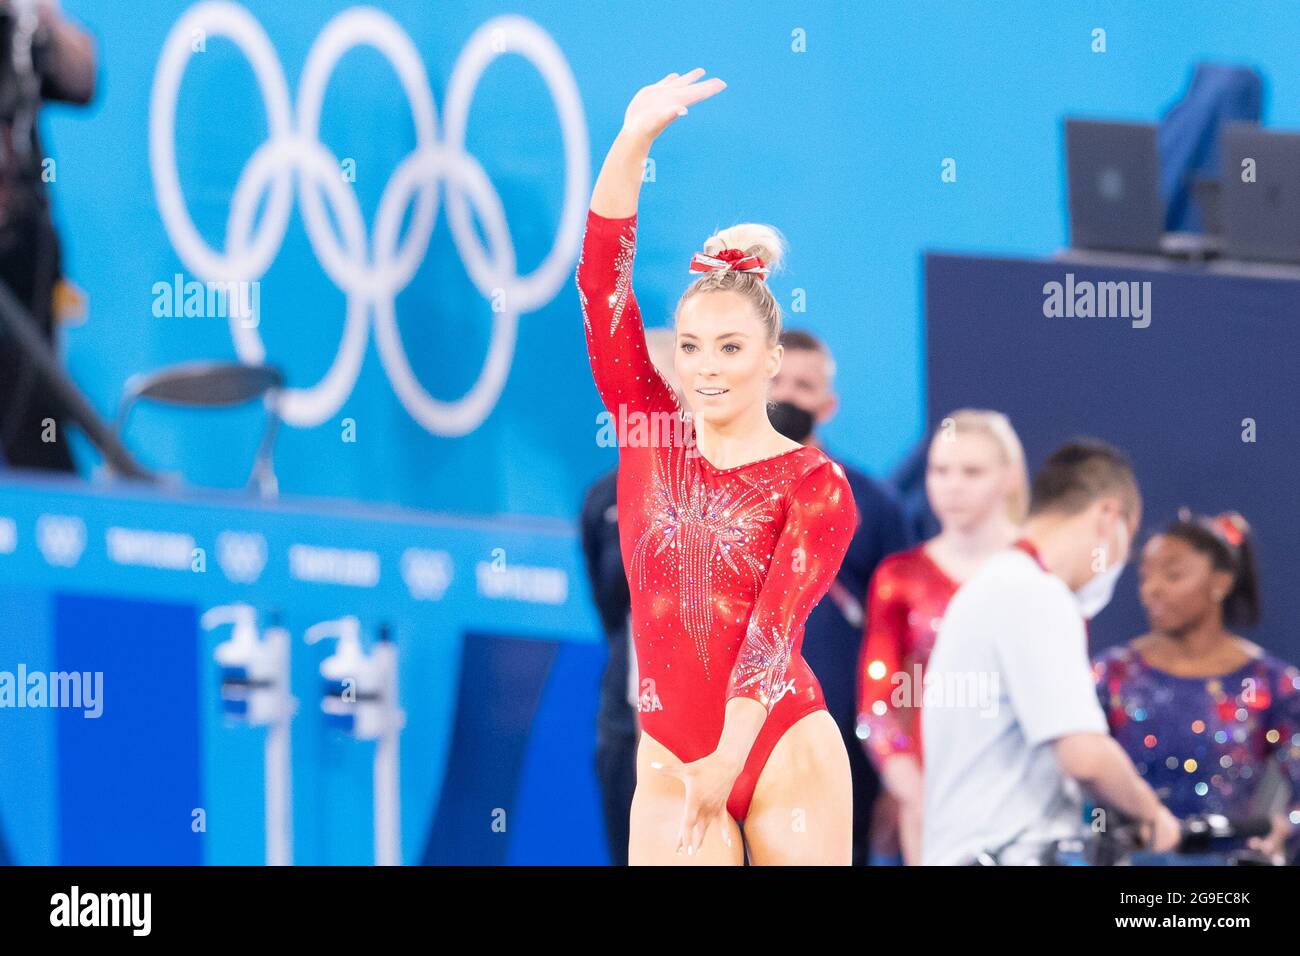 Tokyo, Japan. 25th July, 2021. Mykayla Skinner of United States (397) perform floor routine during the Tokyo 2020 Olympic Games Women's Qualification at the Ariake Gymnastics Centre in Tokyo, Japan. Daniel Lea/CSM}. Credit: csm/Alamy Live News Stock Photo